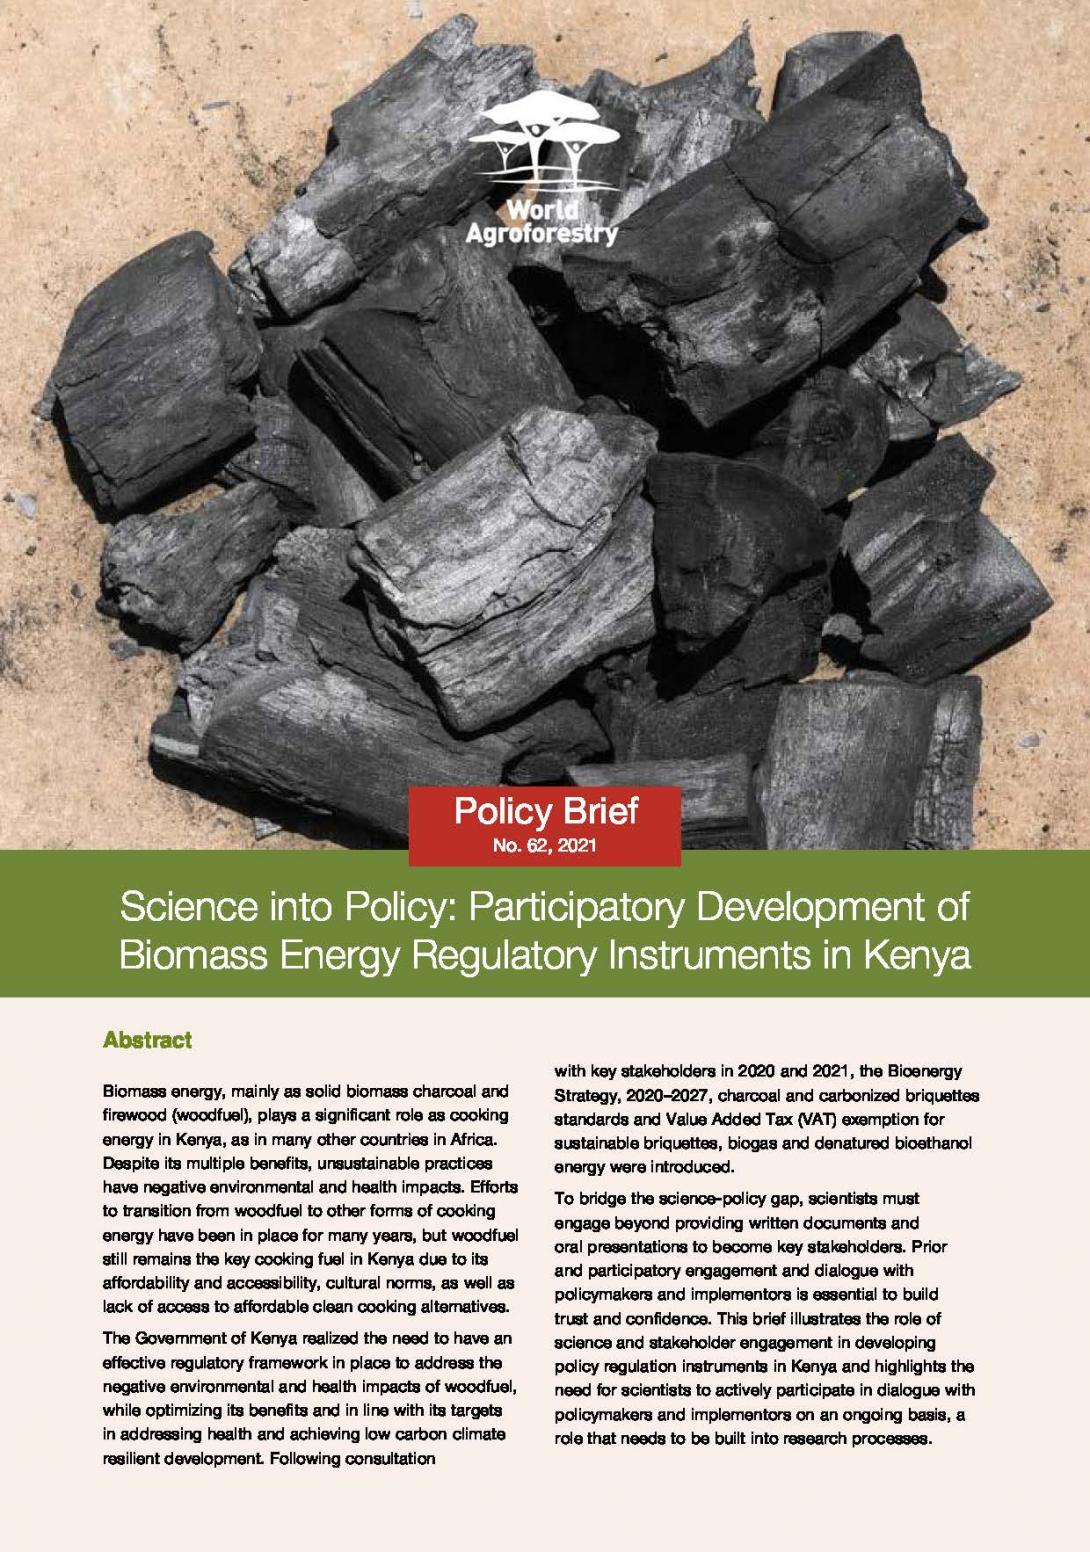 Science into Policy: Participatory Development of Biomass Energy Regulatory Instruments in Kenya